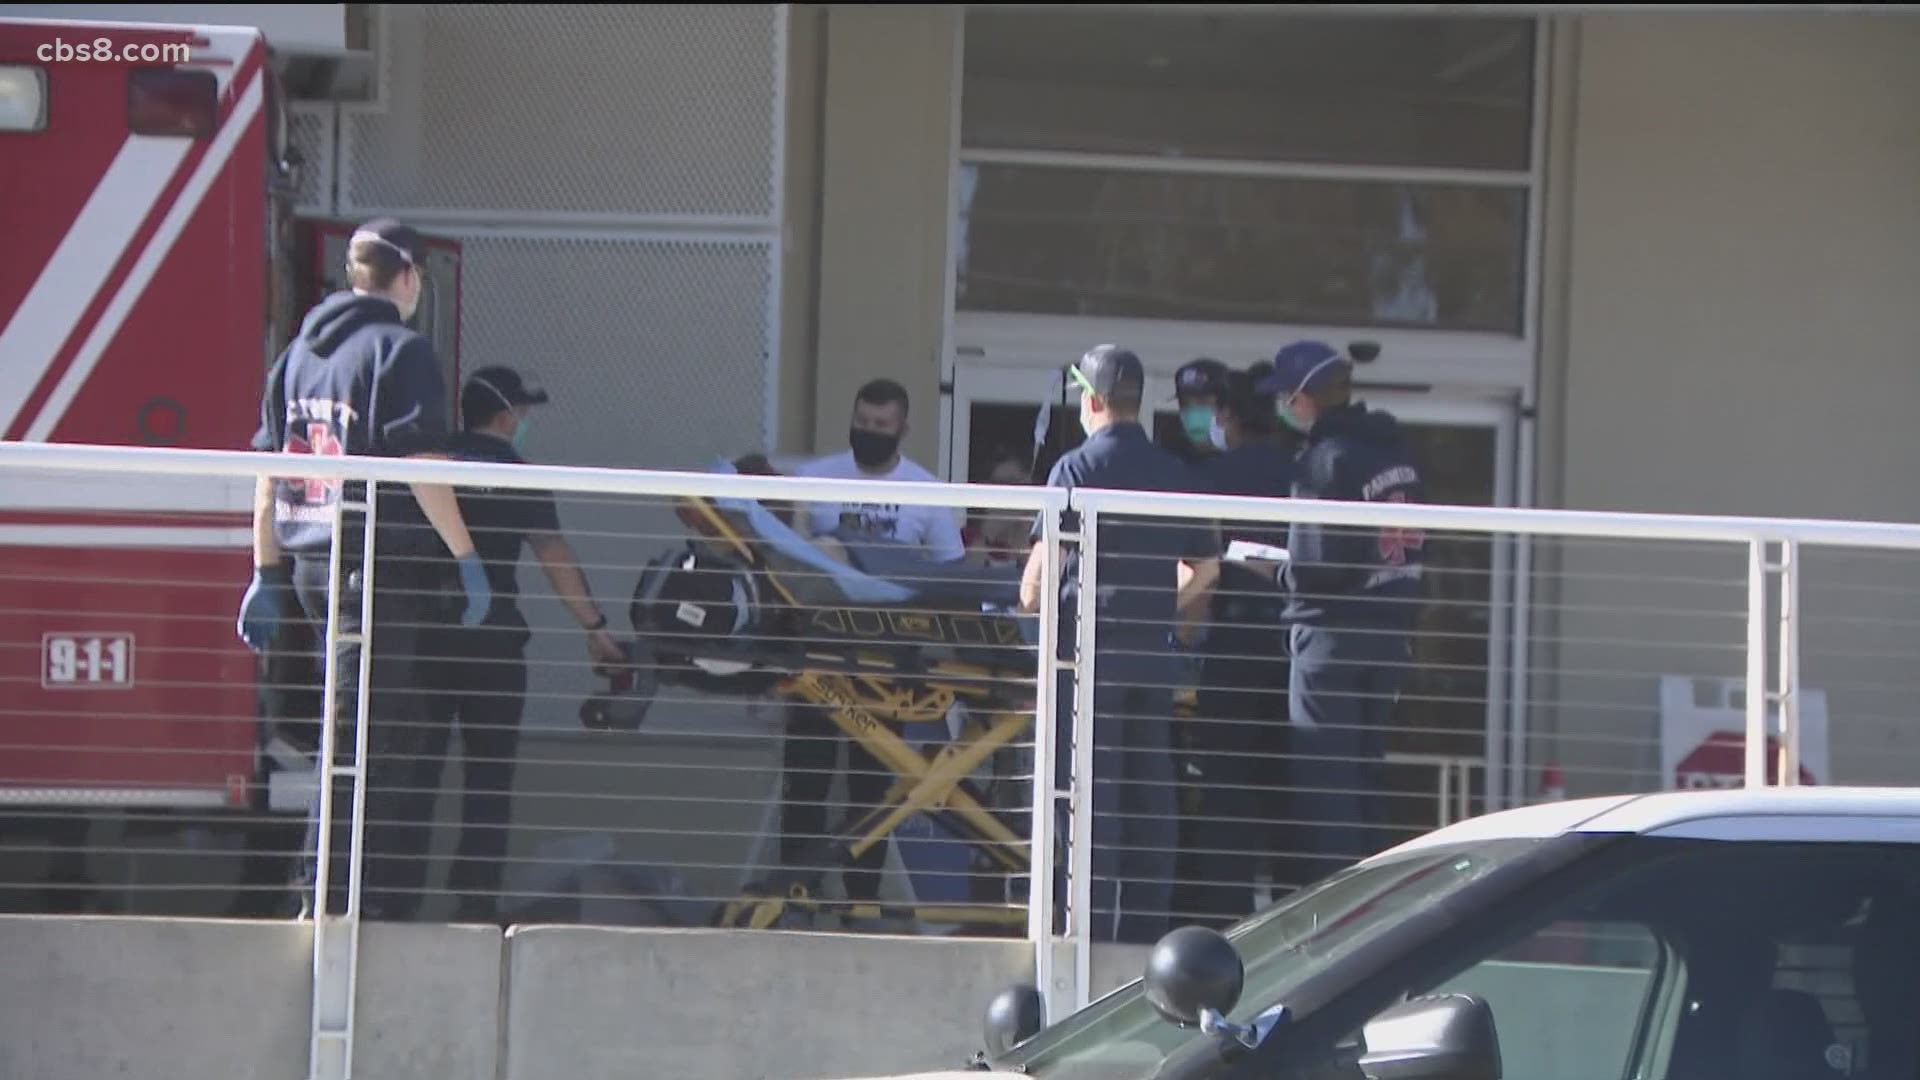 Four were people were injured. Three were treated by UCSD.